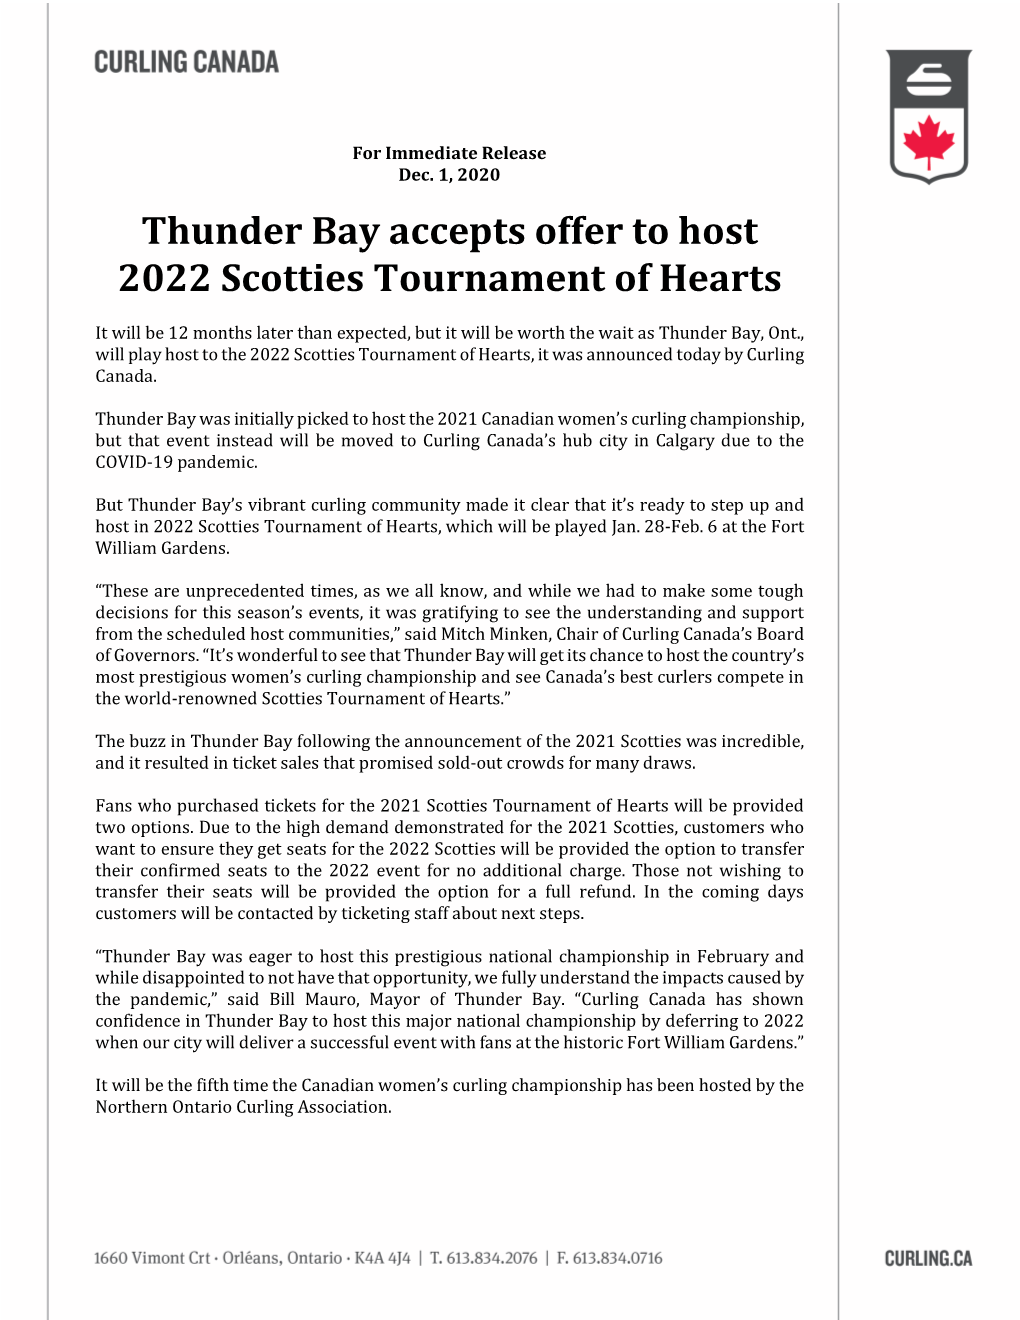 Thunder Bay Accepts Offer to Host 2022 Scotties Tournament of Hearts